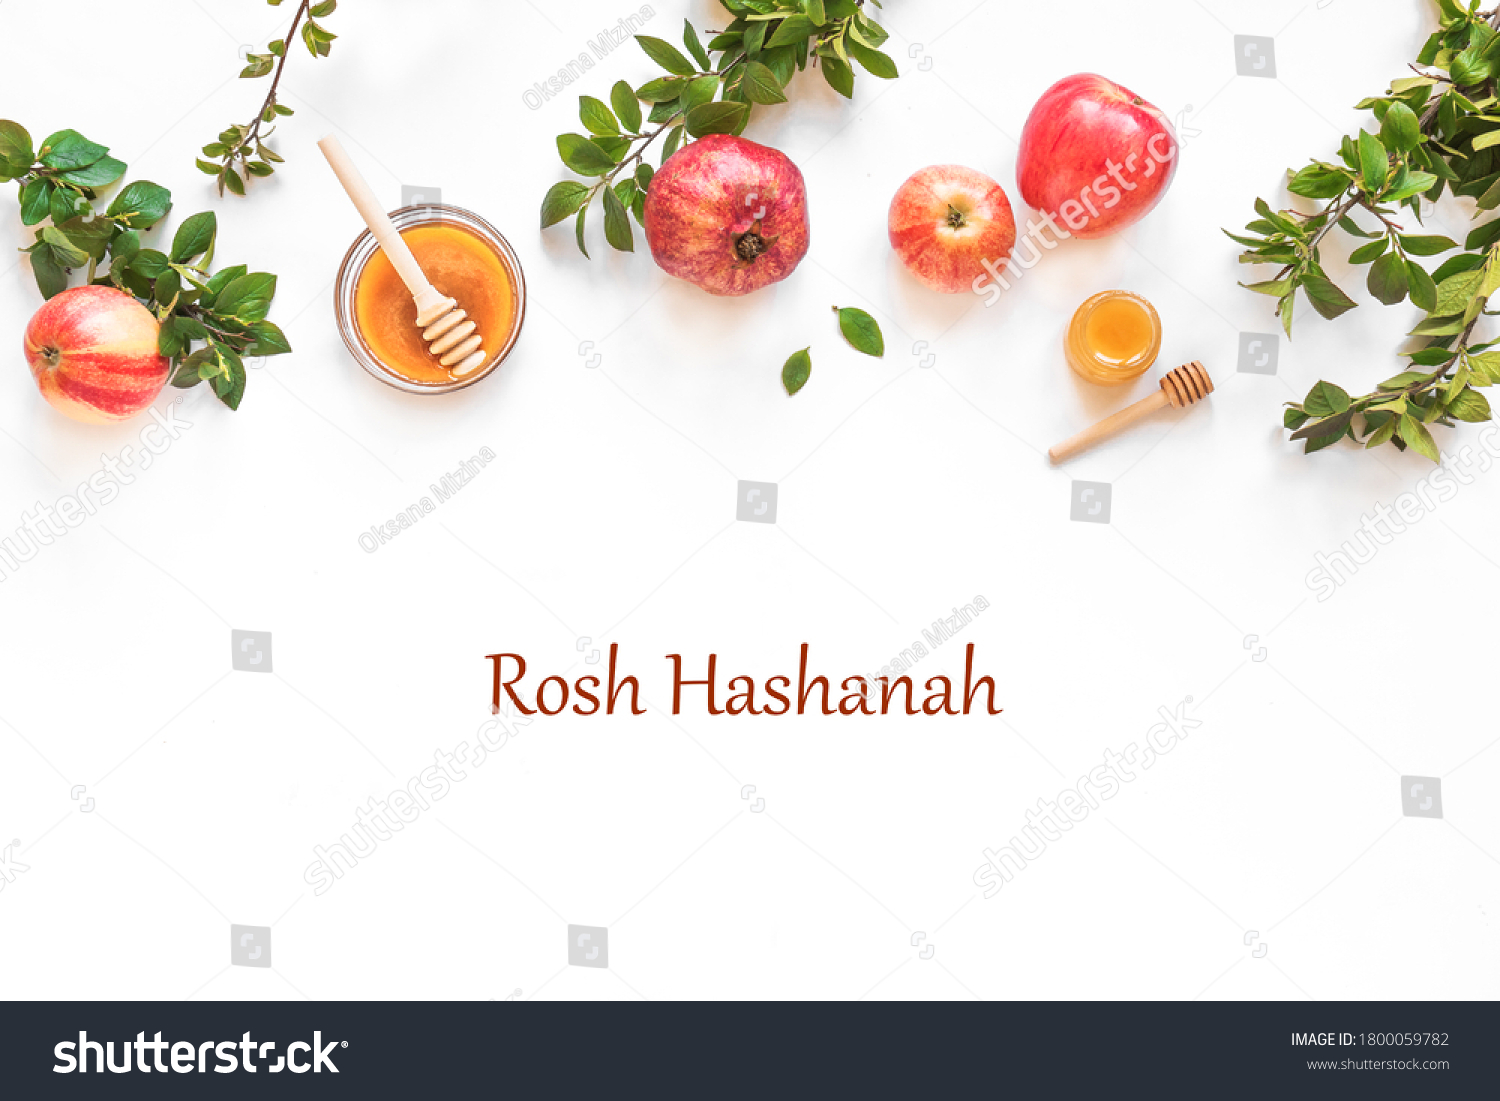 Rosh Hashanah jewish New Year holiday concept banner. Creative layout of traditional symbols - apples, honey, pomegranate isolated on white, top view, copy space. #1800059782